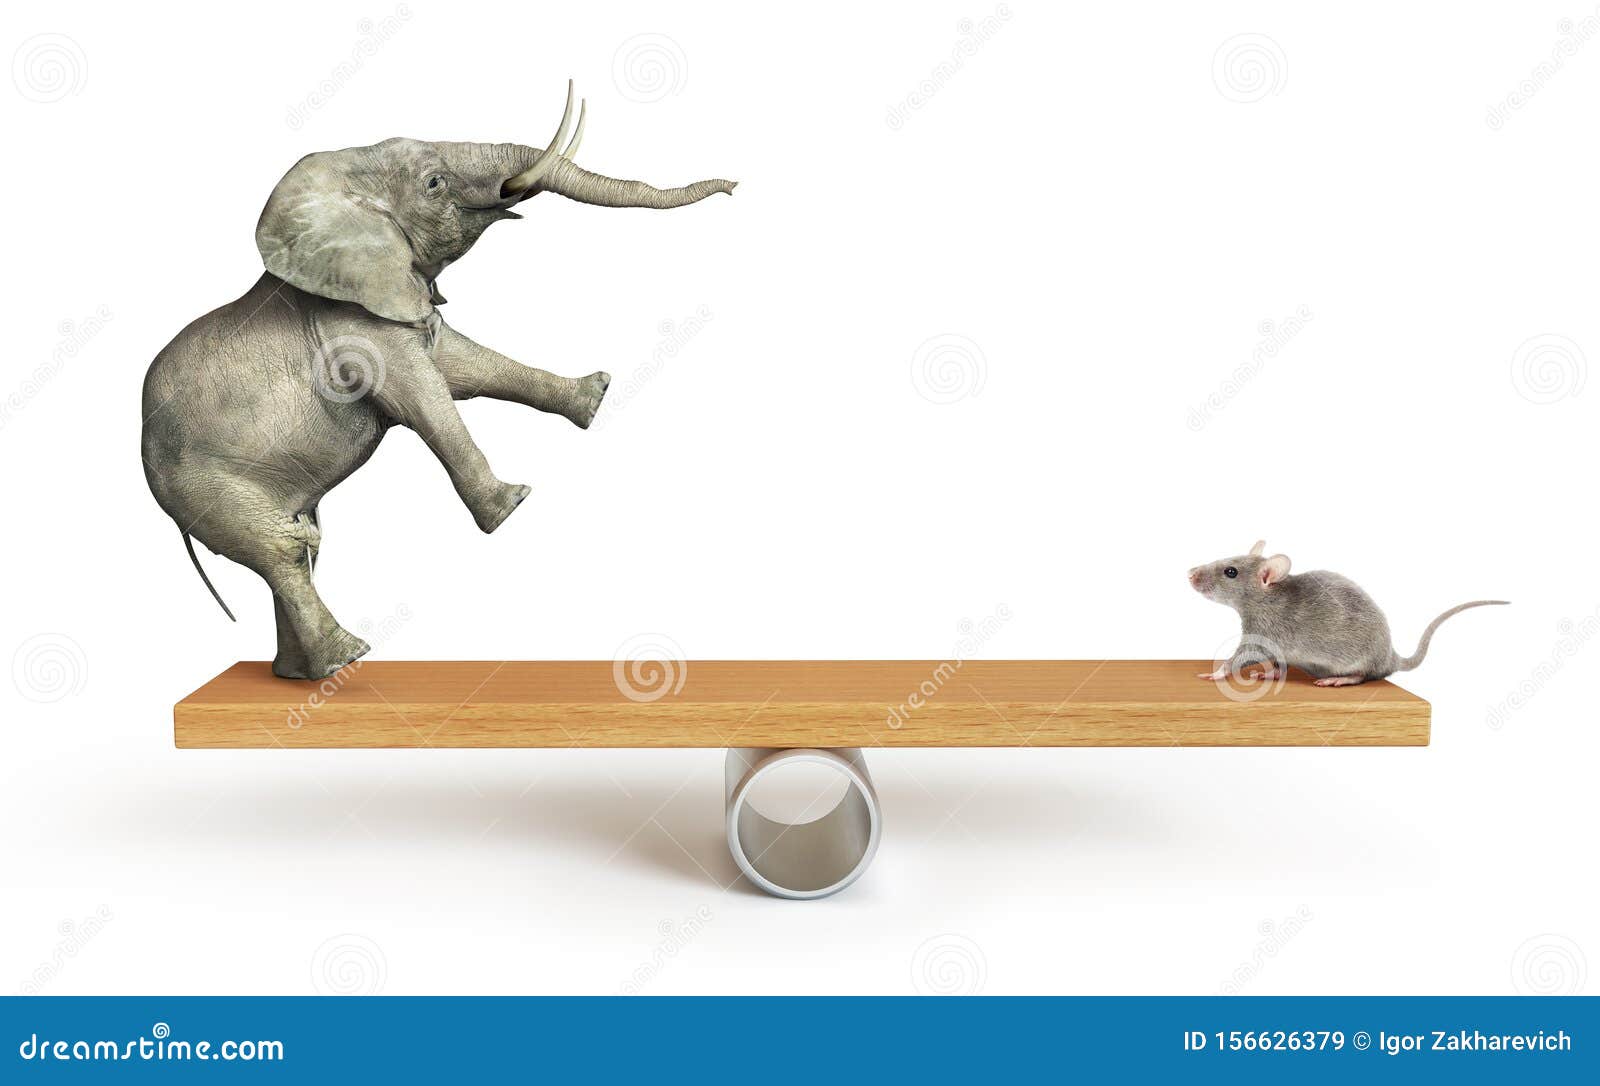 concept of things importance. elephant and mouse balanced on a seesaw